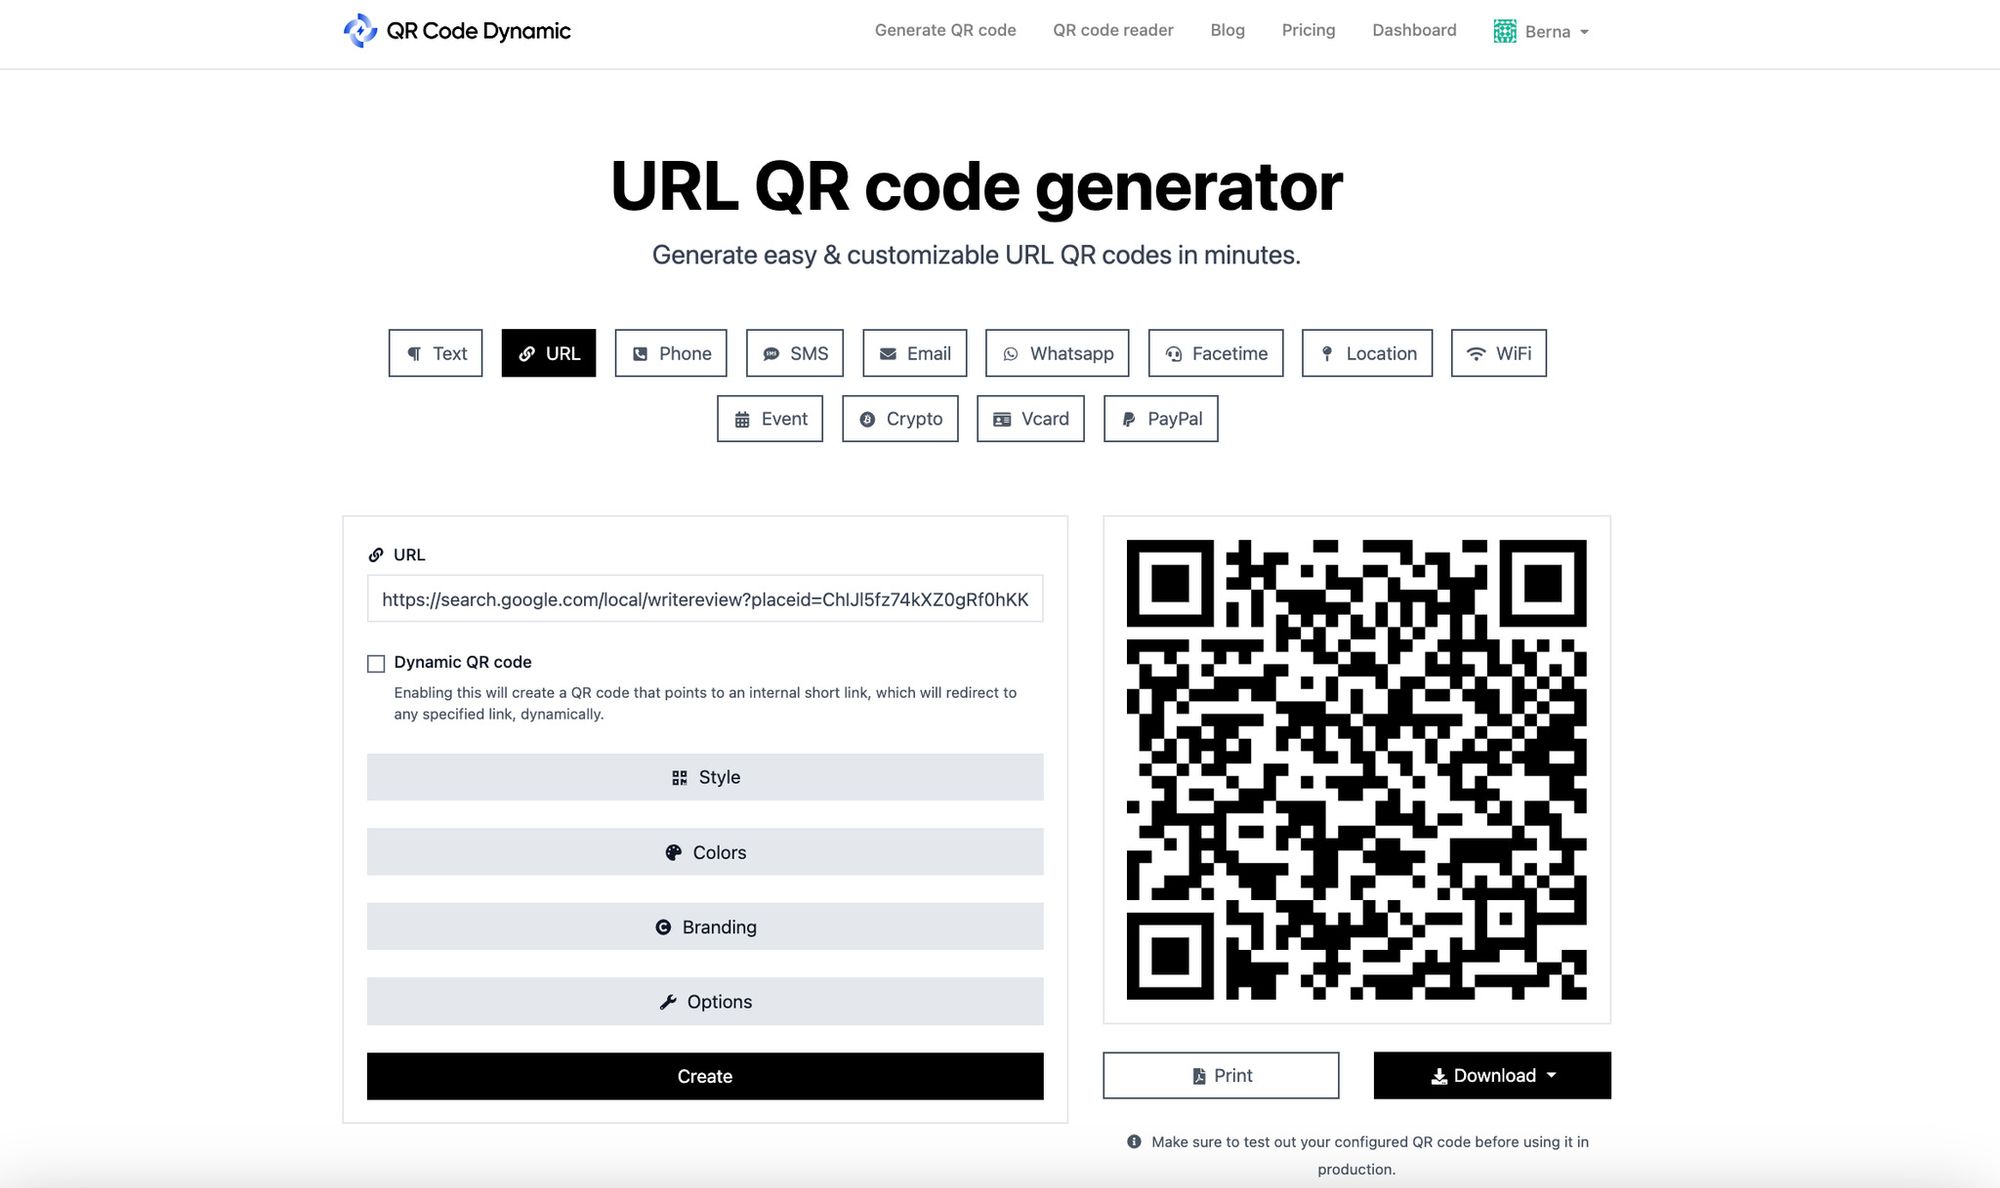 a screenshot of creating URL QR code for Google Reviews on QRCodeDynamic